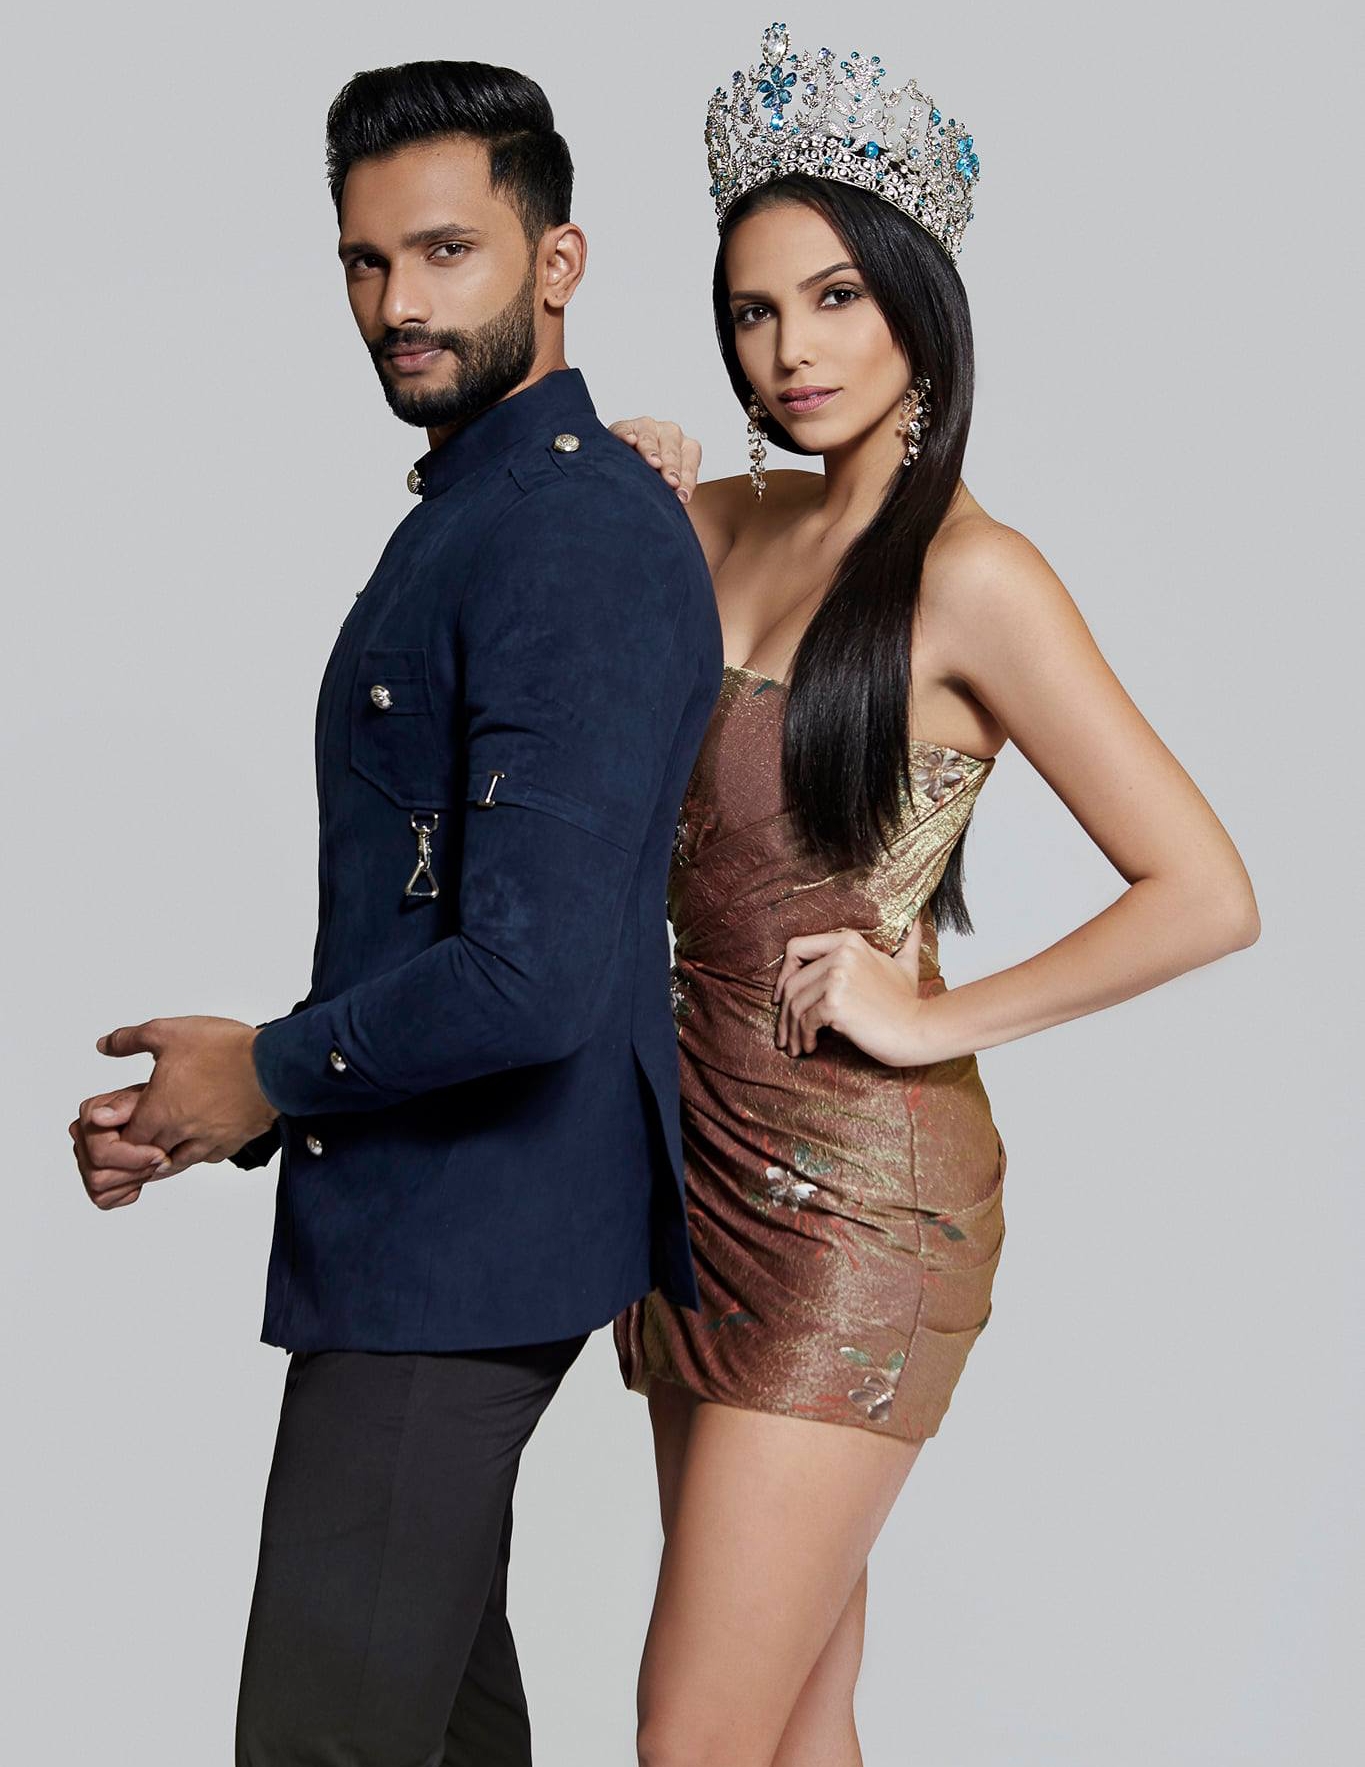 Miss and Mister Supranational 2018 Prathamesh Maulingkar from India and Valeria Vazquez from Puerto Rico